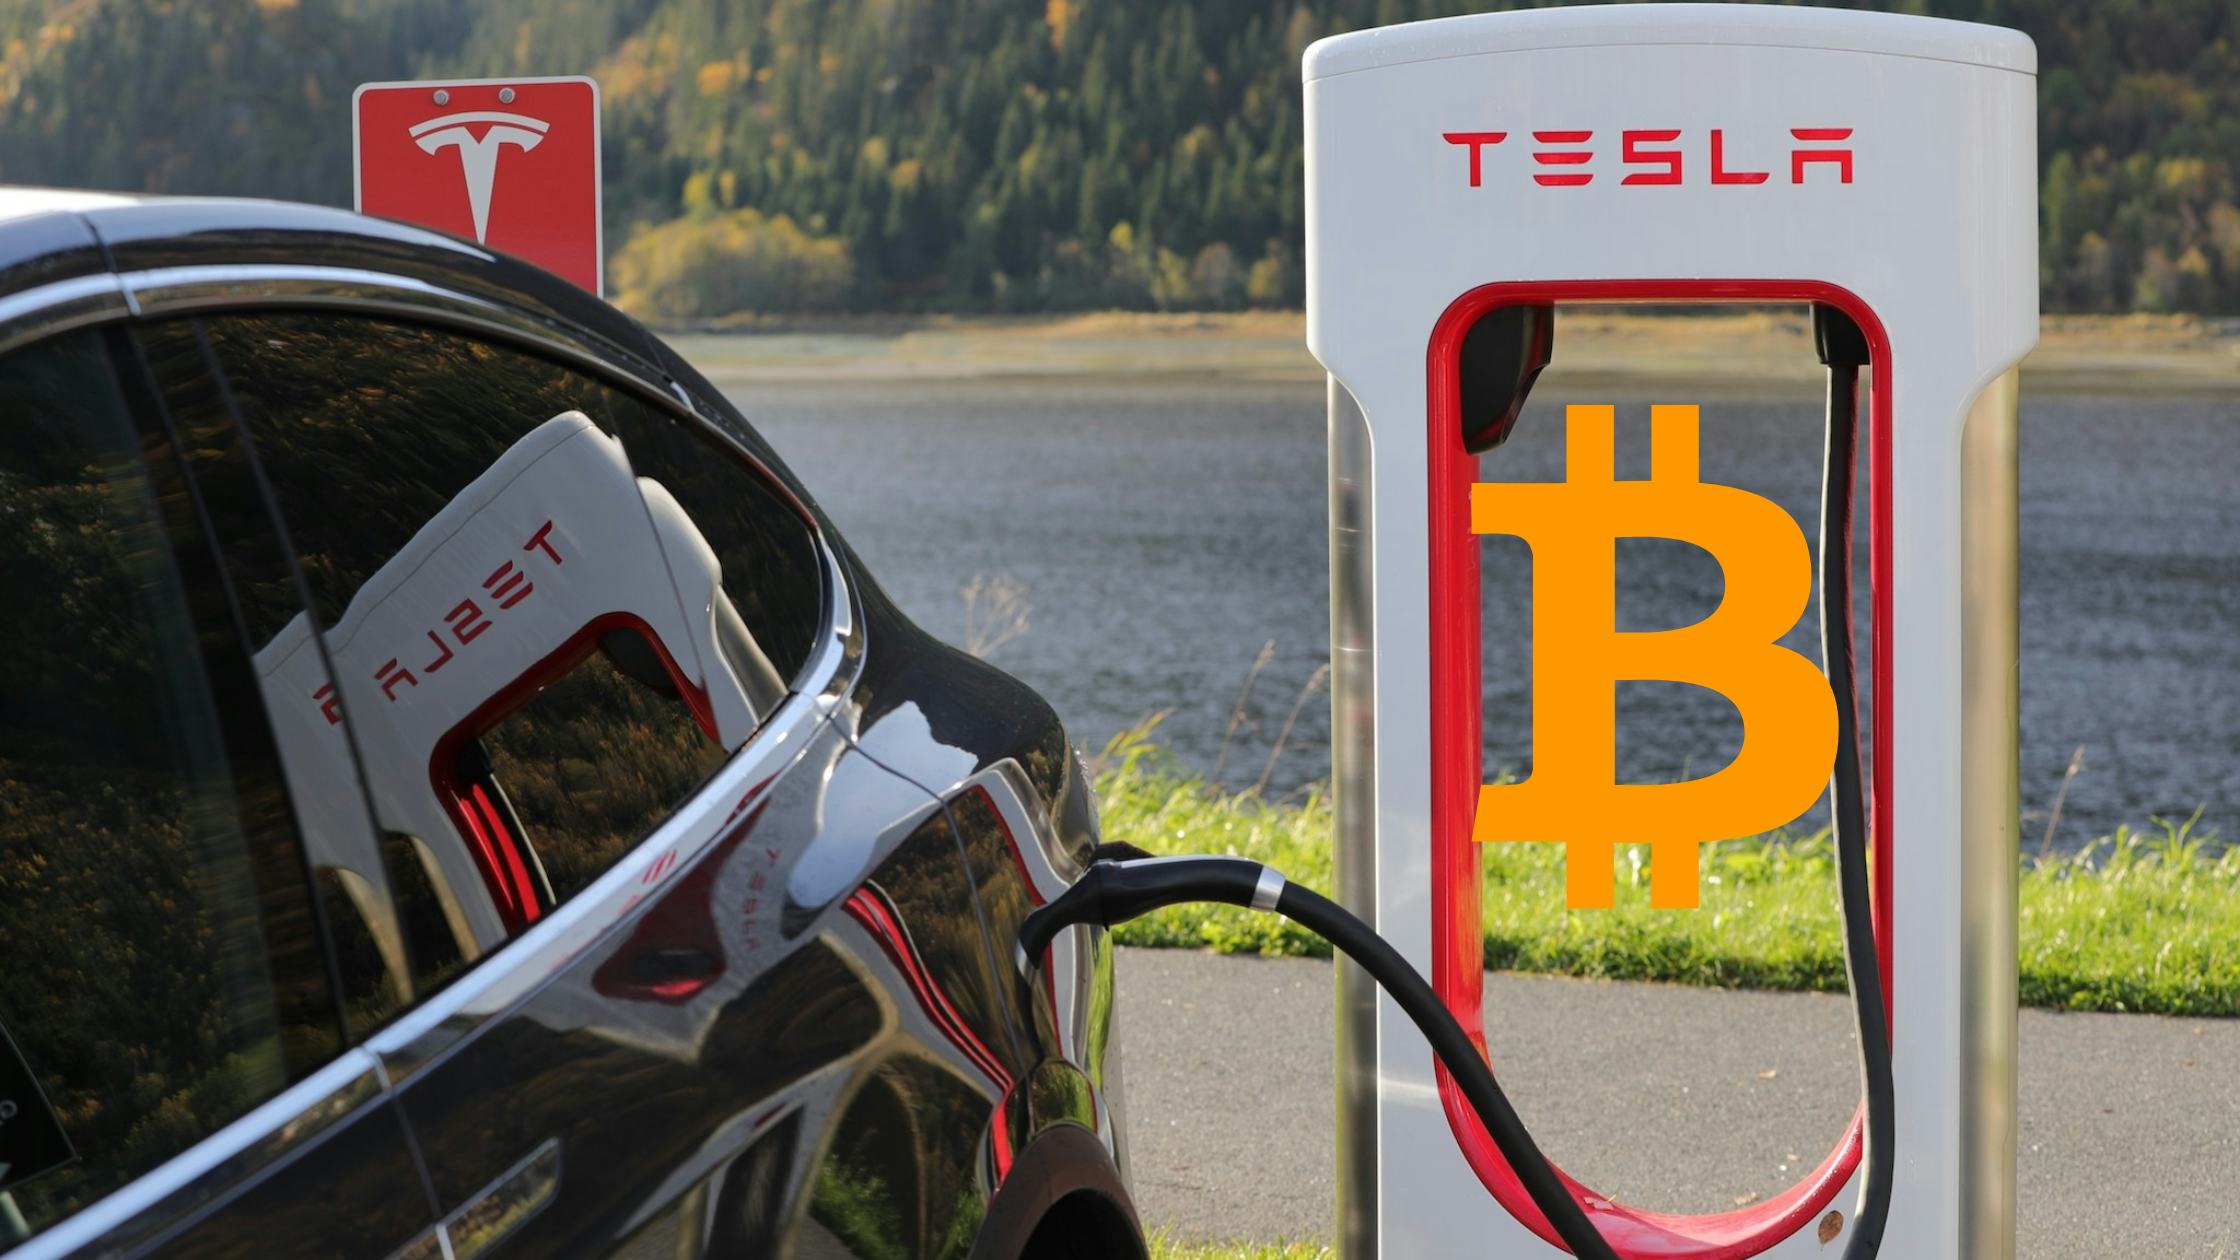 Here's How Much Tesla Lost by Selling Its Bitcoins at $29,000